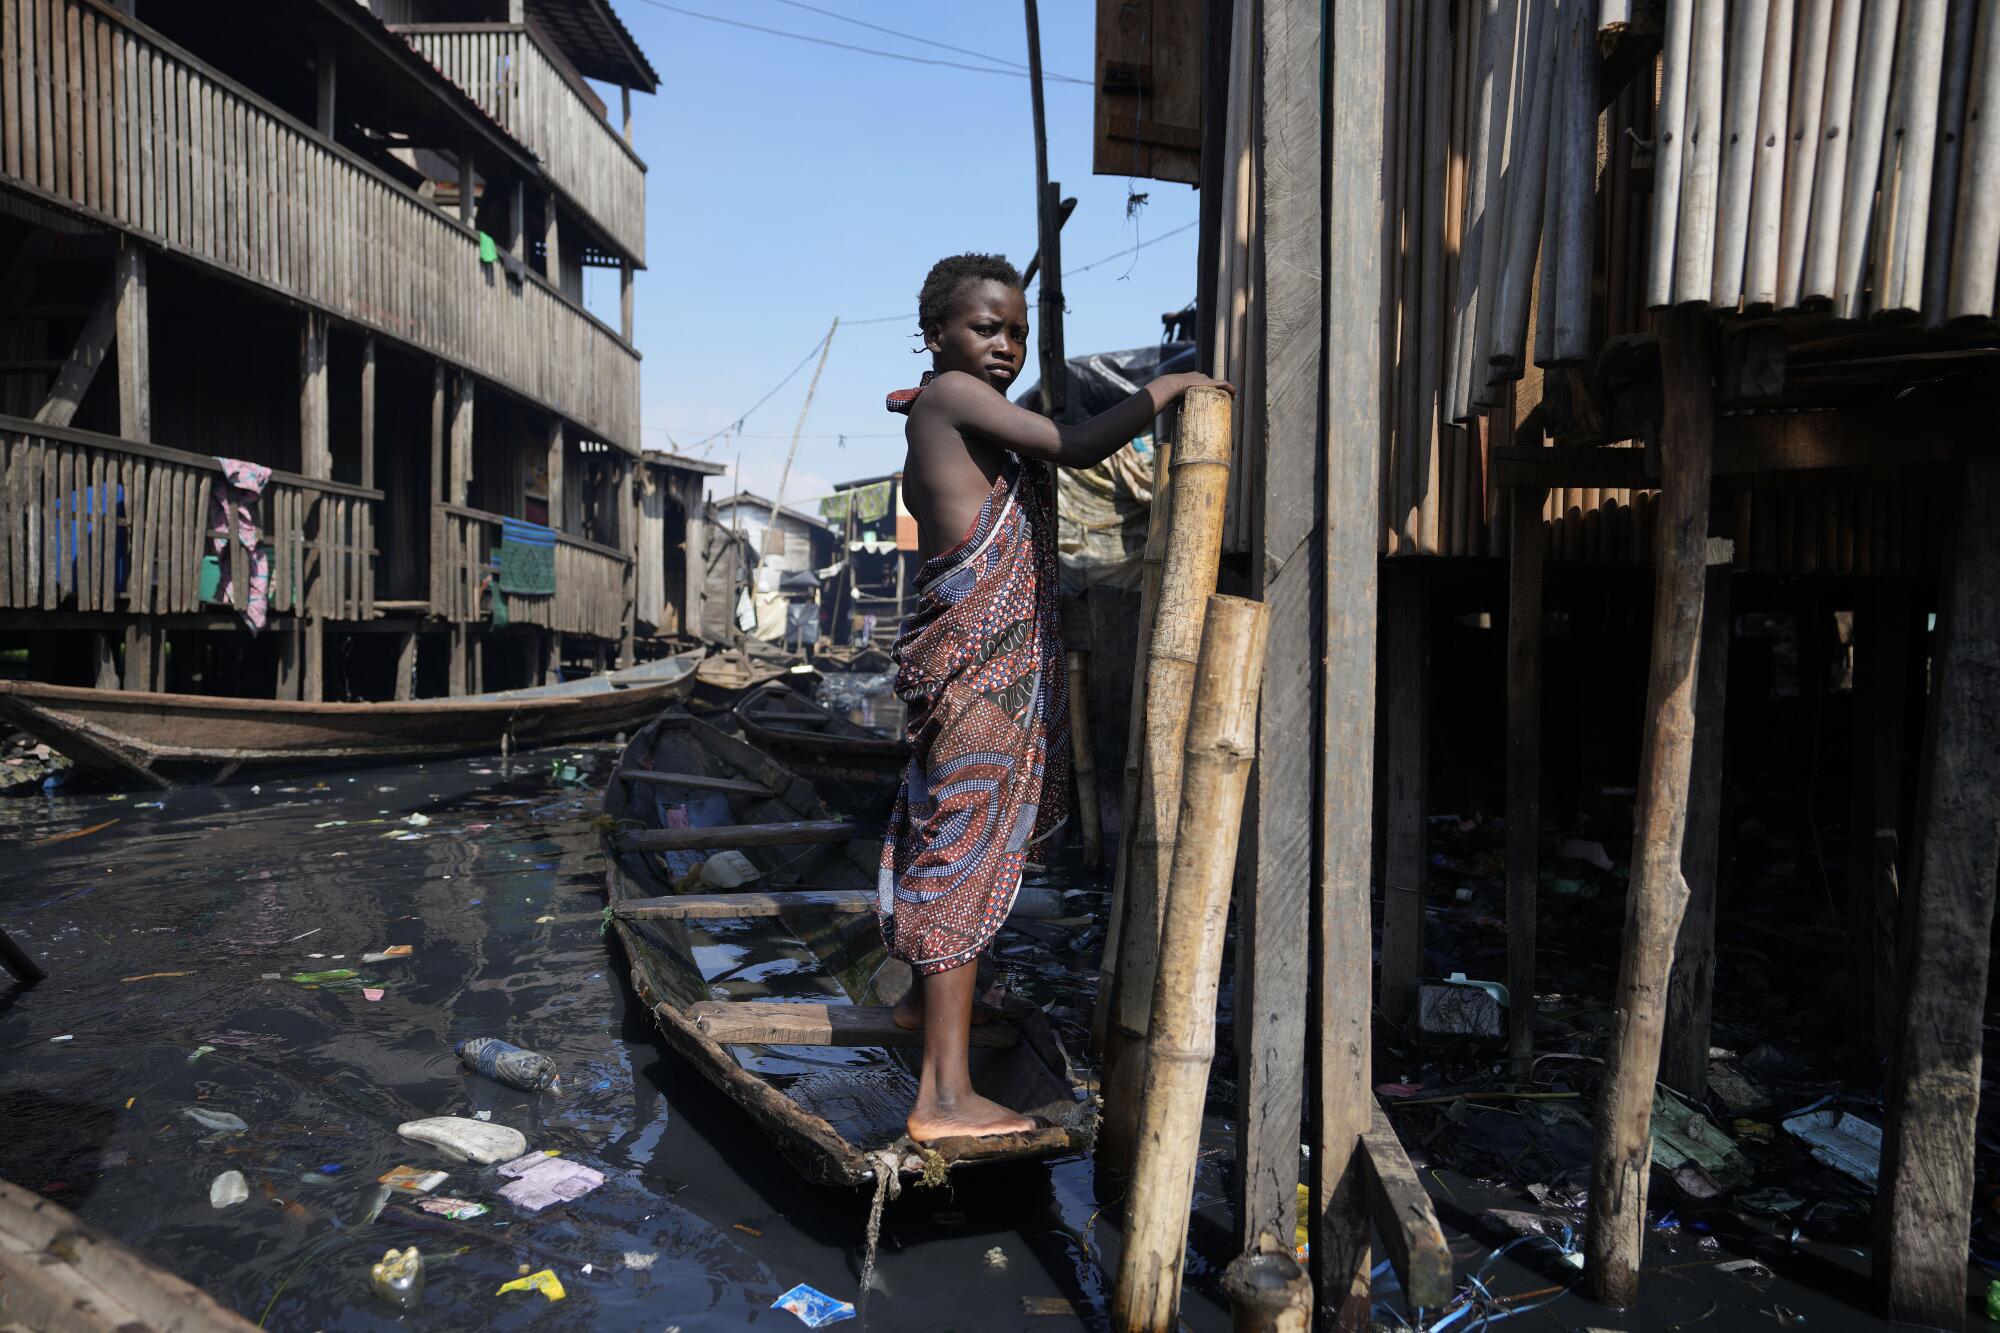 A child stands in filthy water surrounded by garbage in a slum in Lagos, Nigeria.